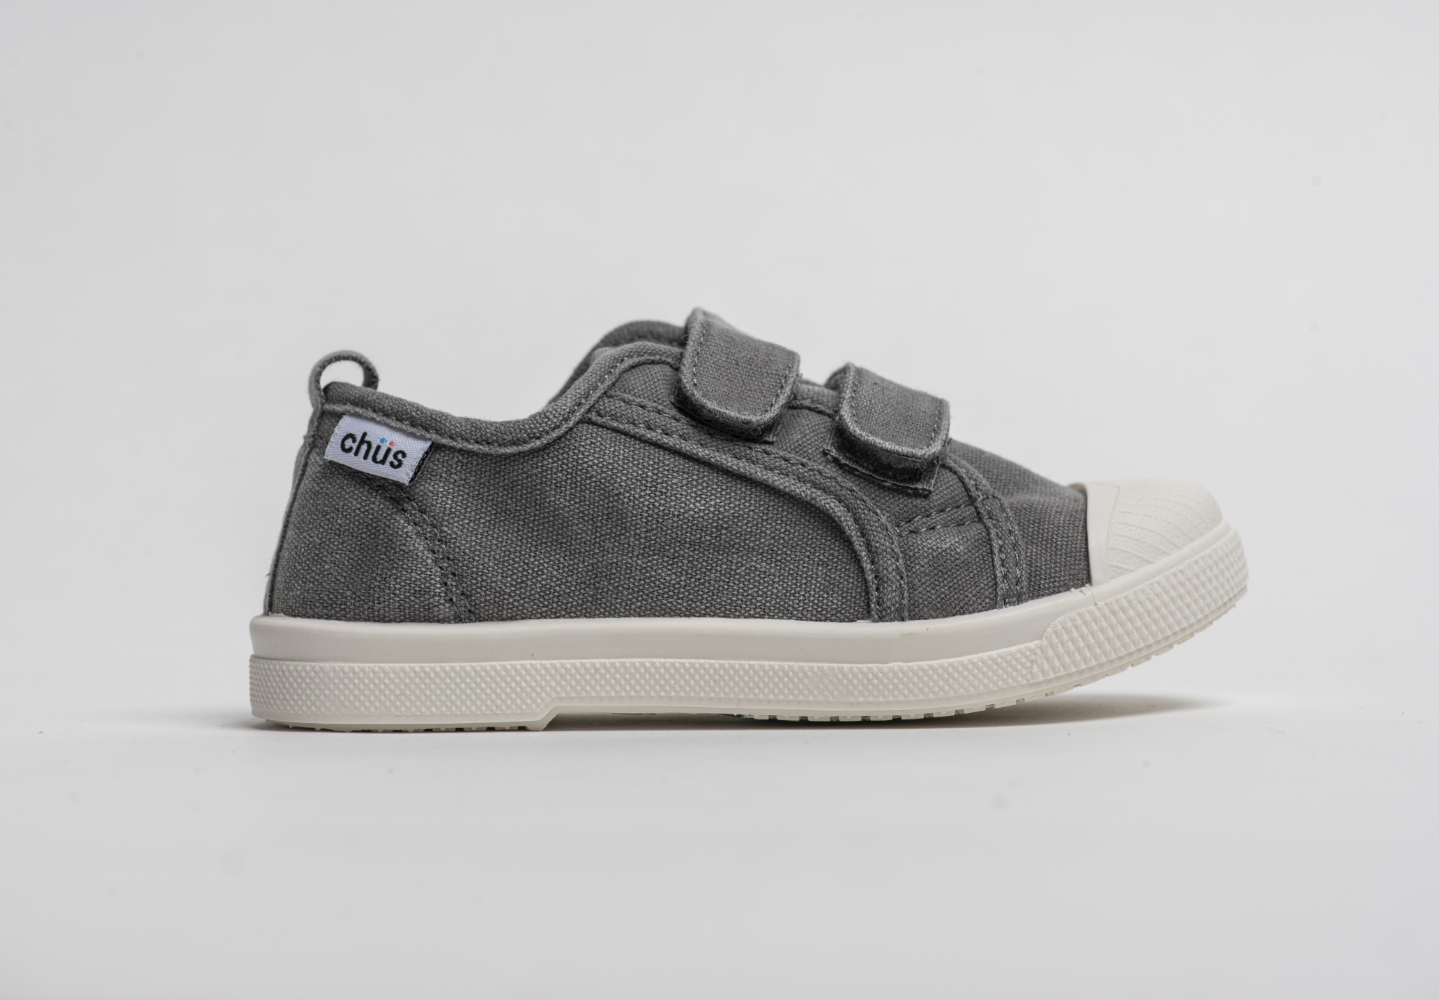 Distressed grey canvas sneakers with double velcro straps. Chus Shoes. Side view.